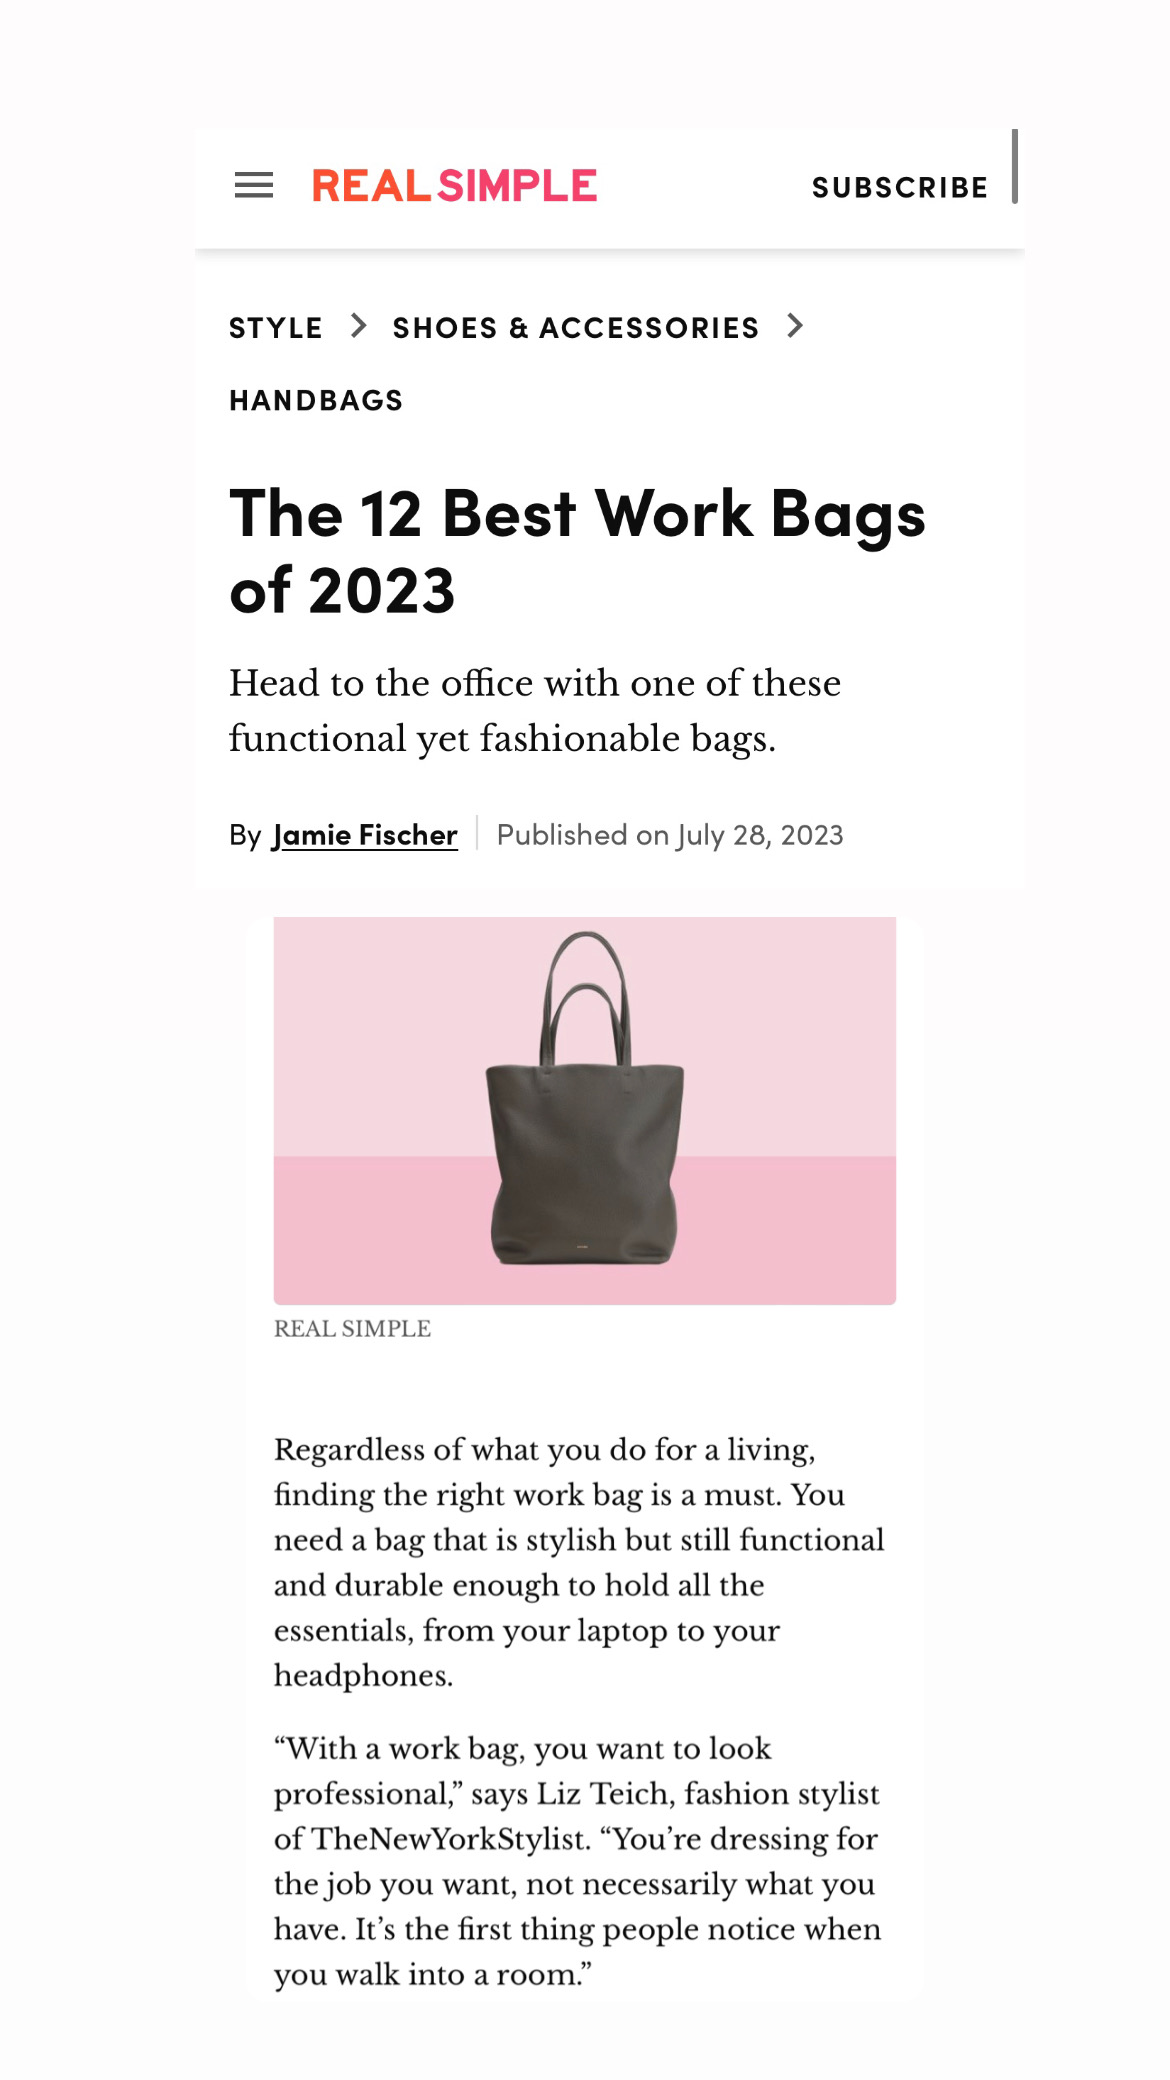 25 Black-Owned Handbags Brands We're Buying in 2022 - PureWow